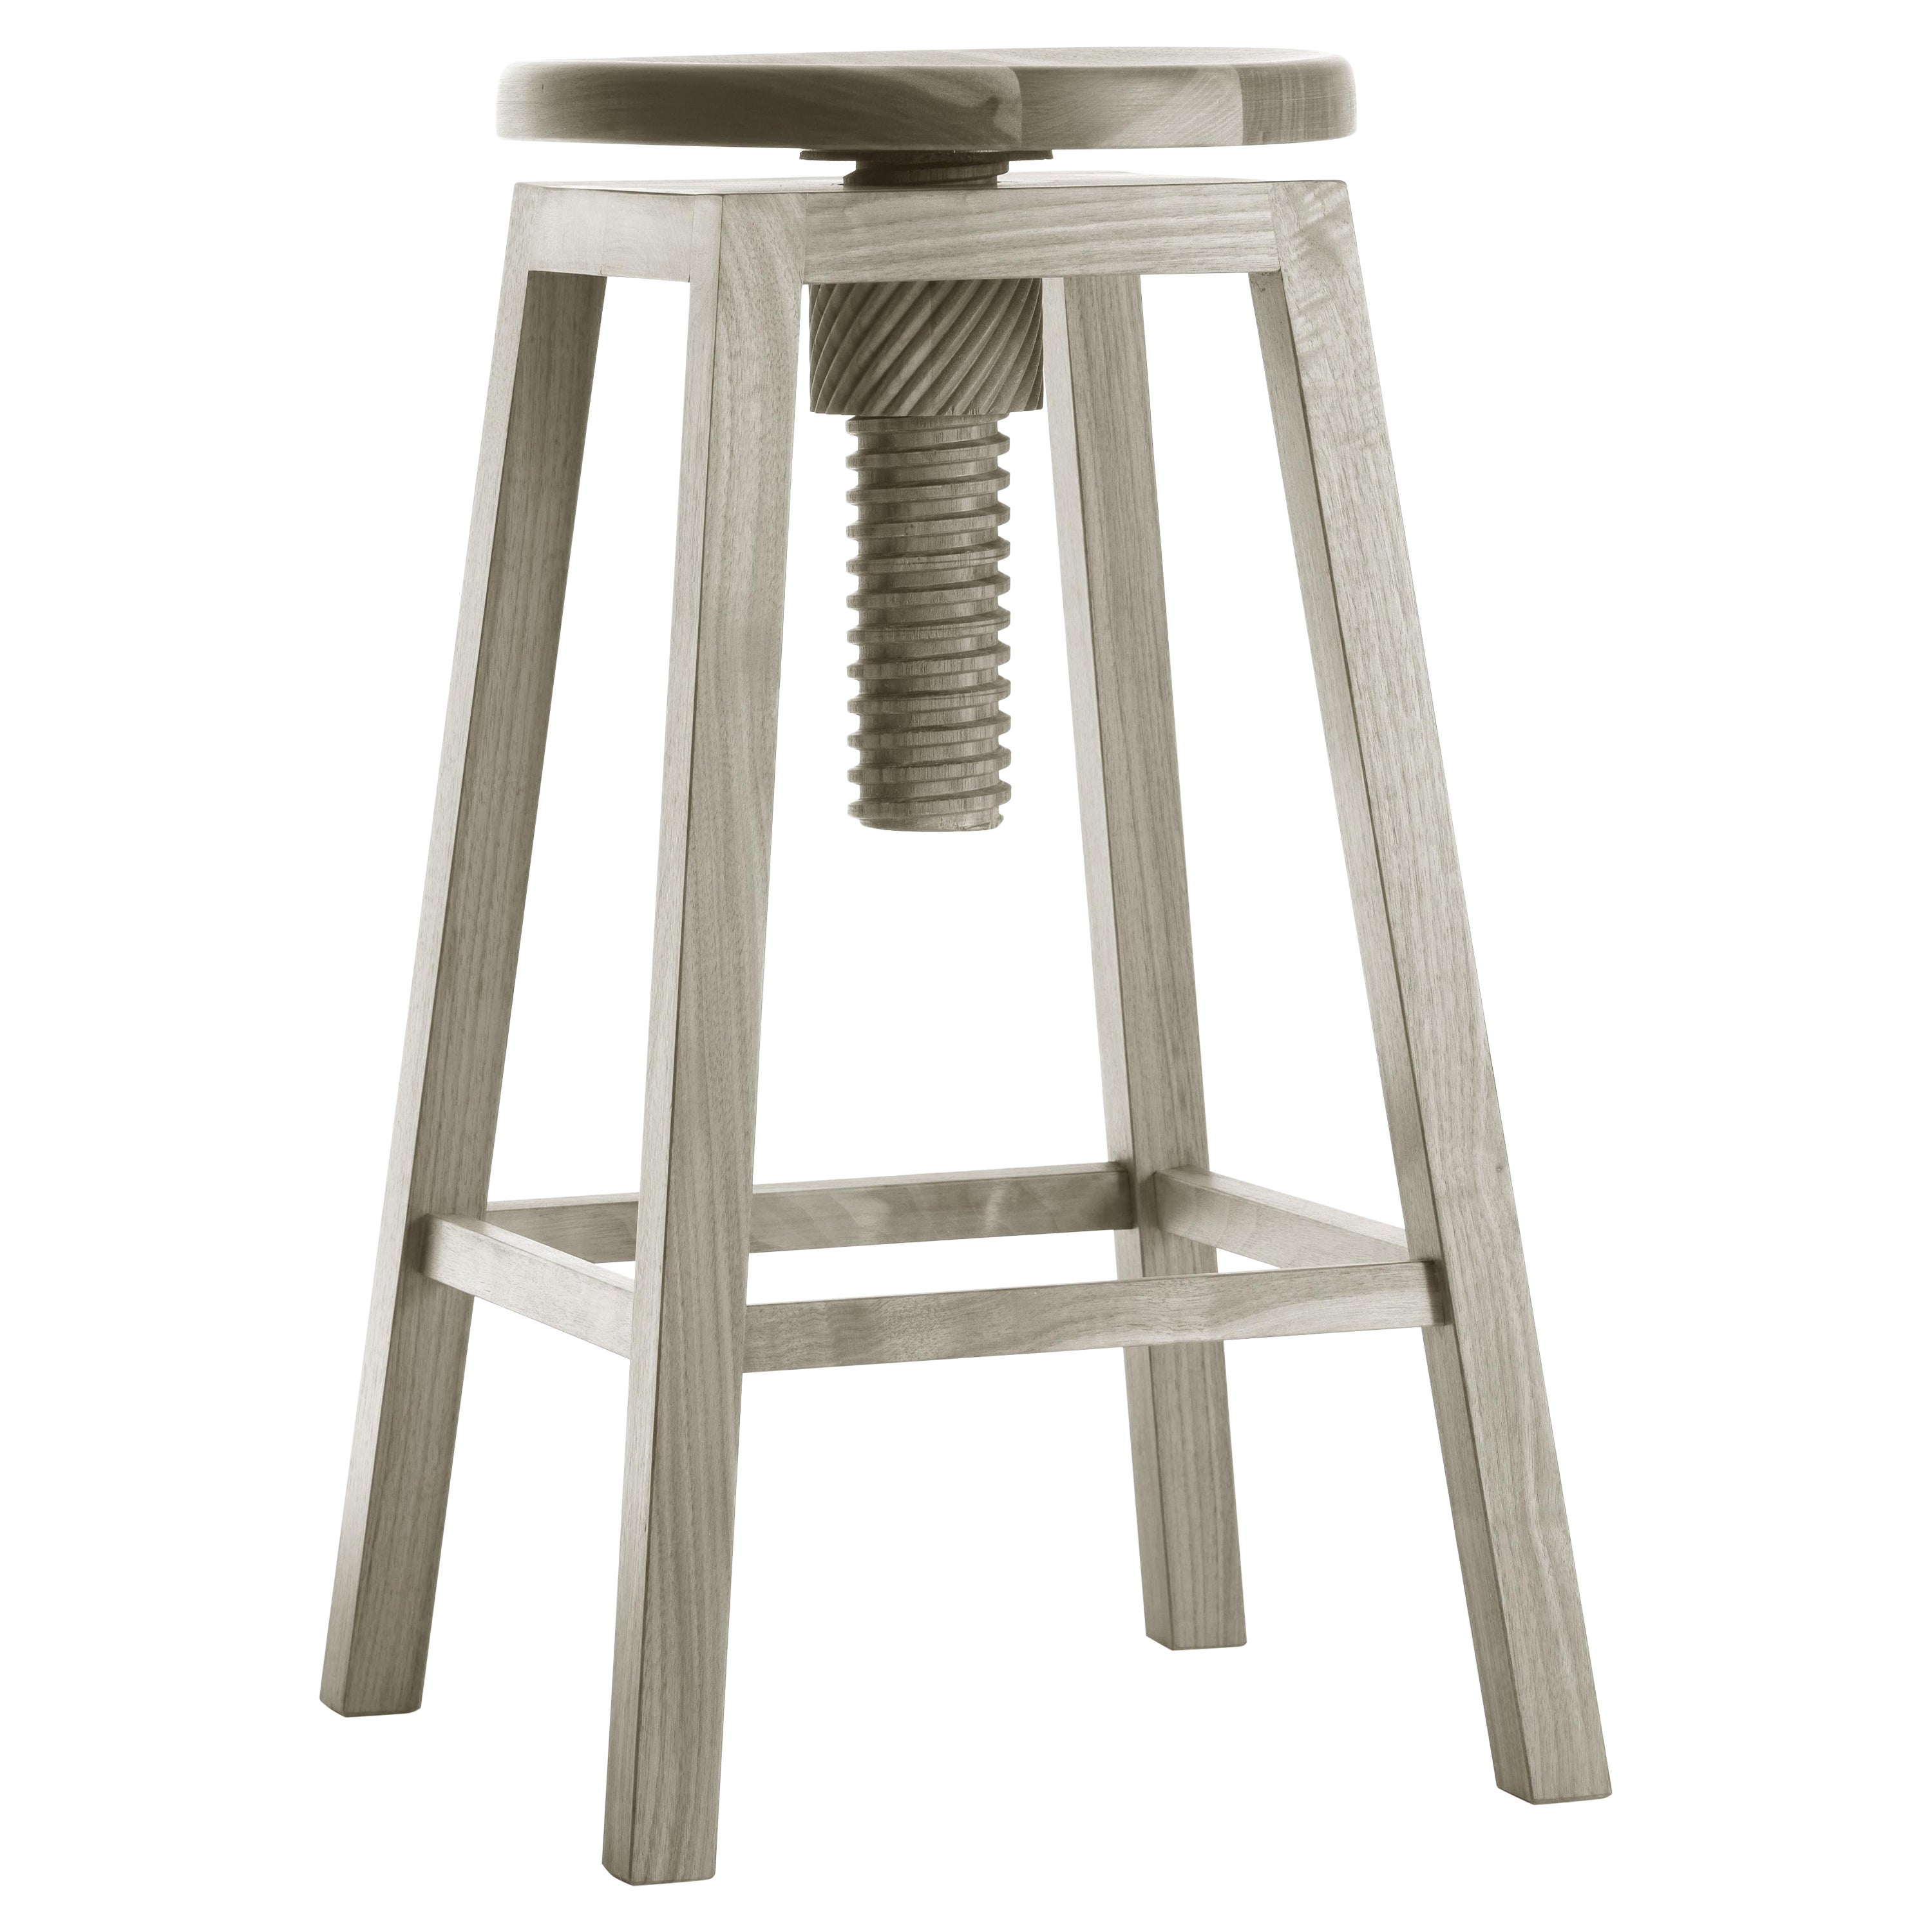 Invito Solid Wood Stool, Walnut in Hand-Made Natural Grey Finish, Contemporary For Sale